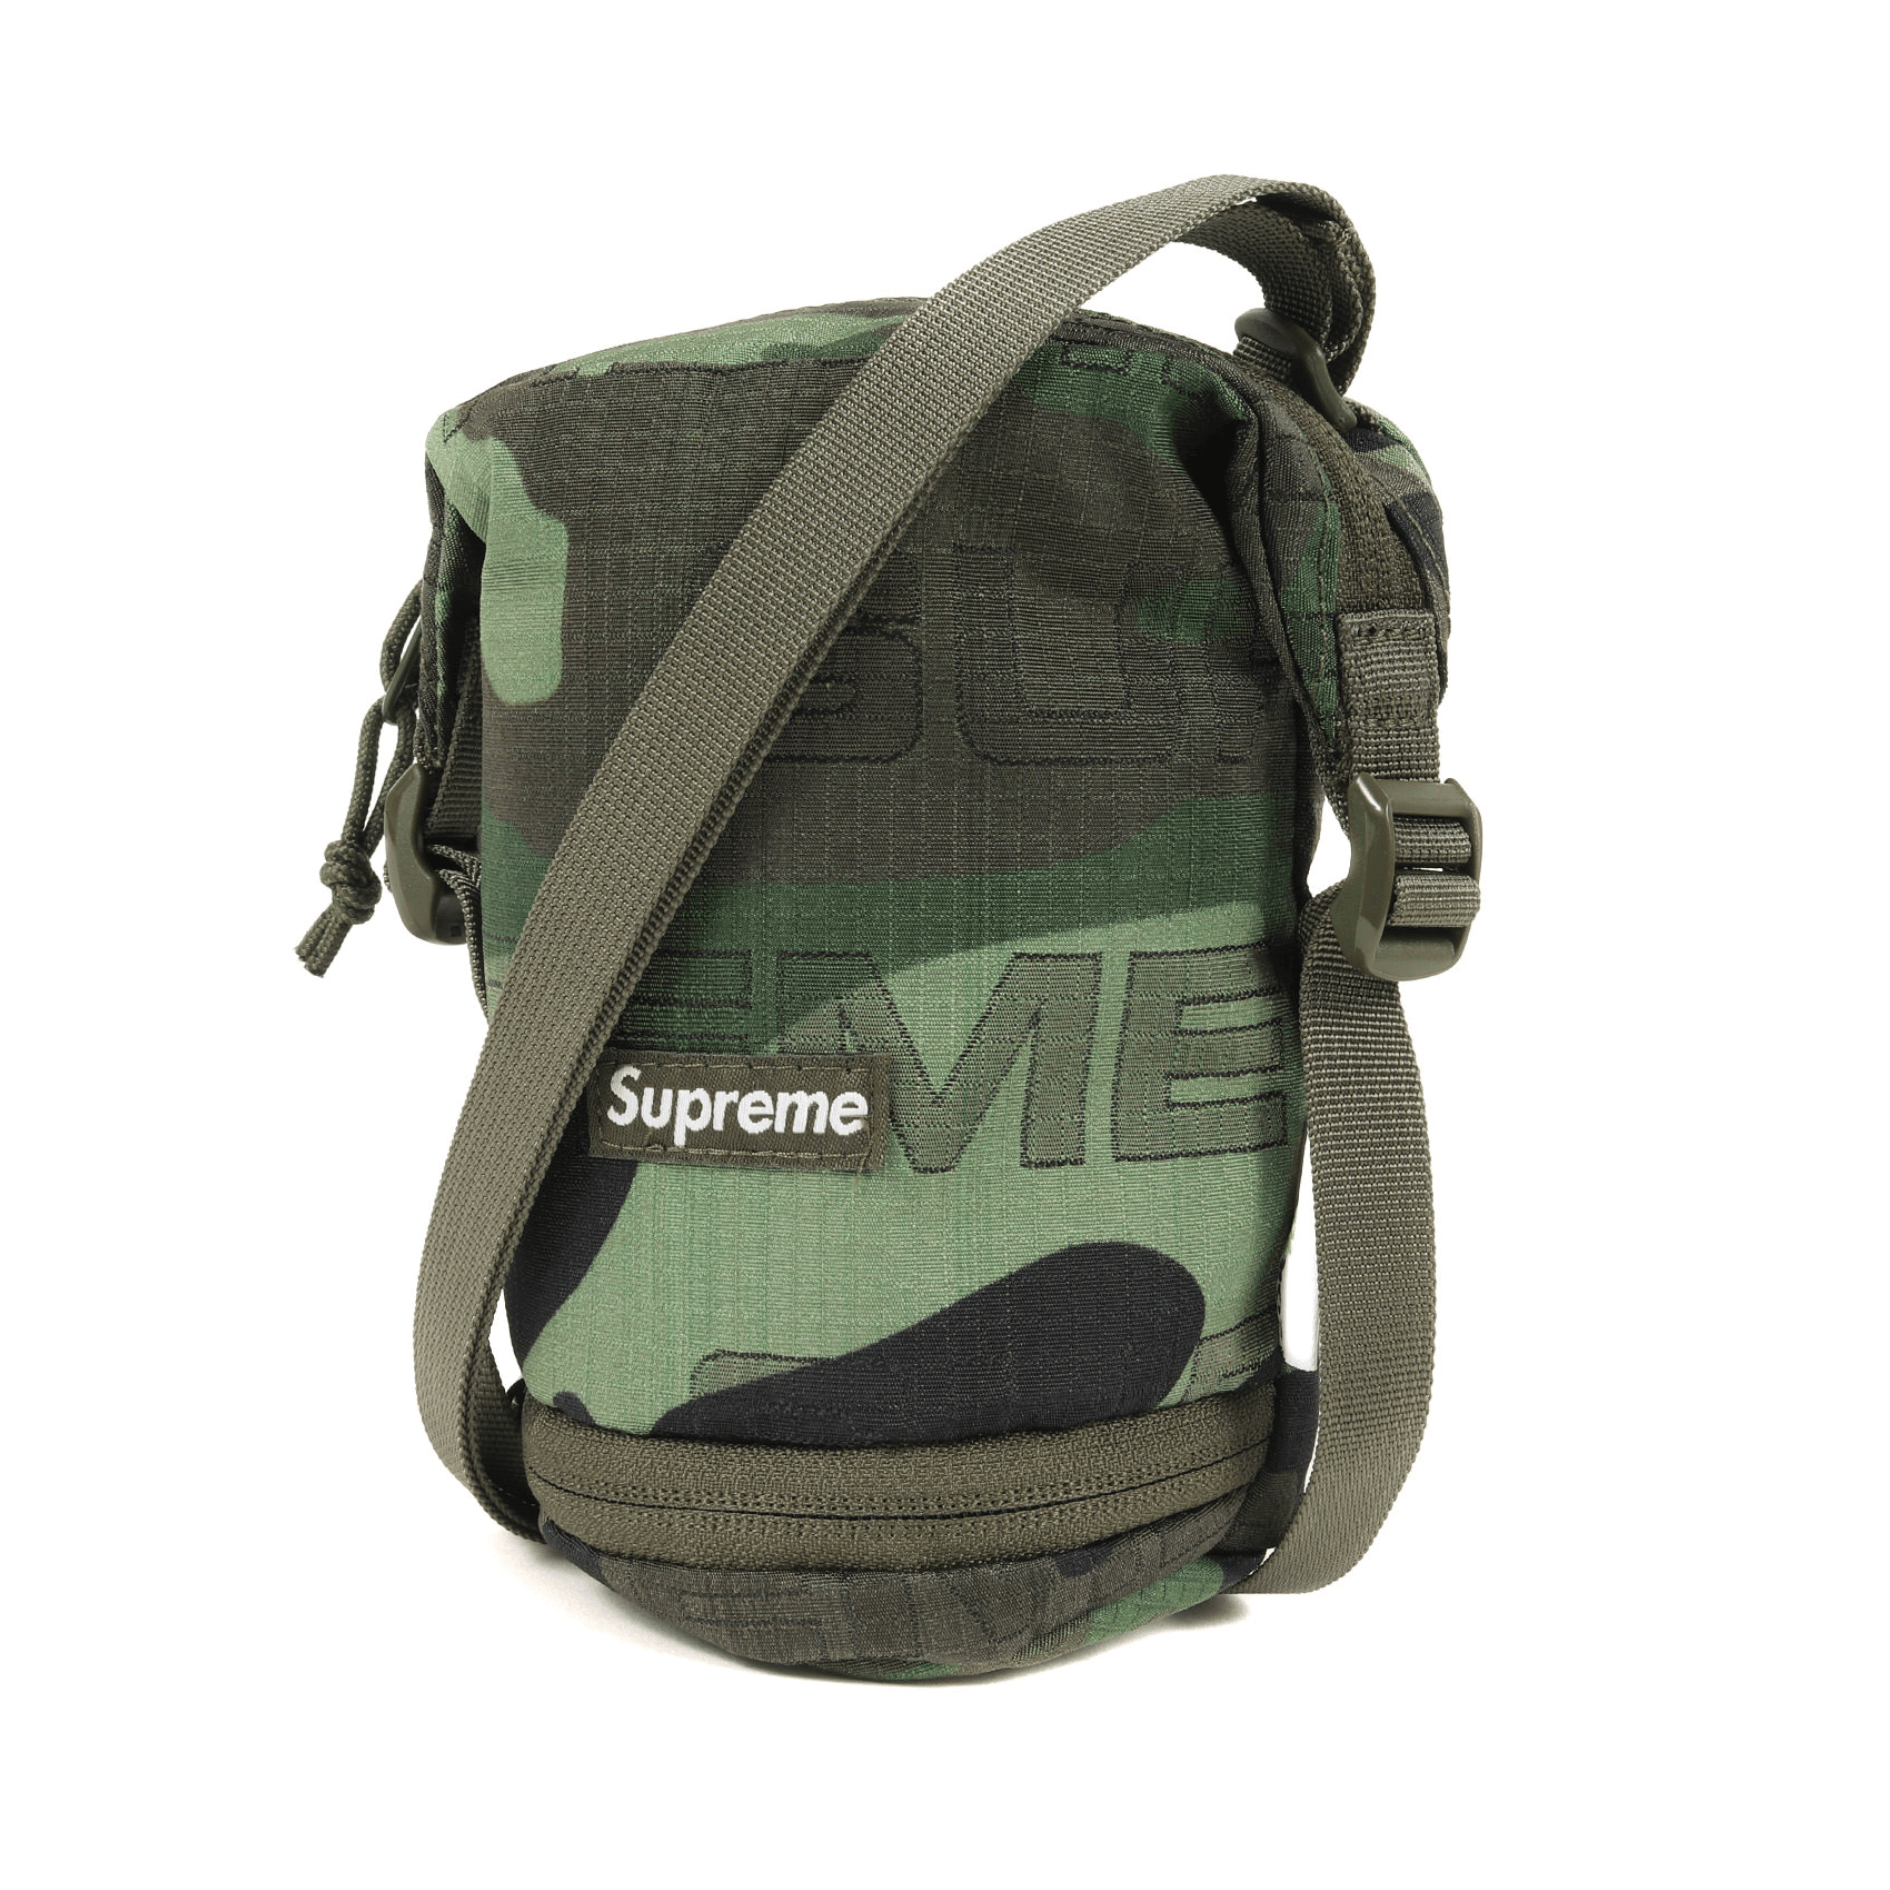 Supreme Utility Pouch - Fashionably Yours